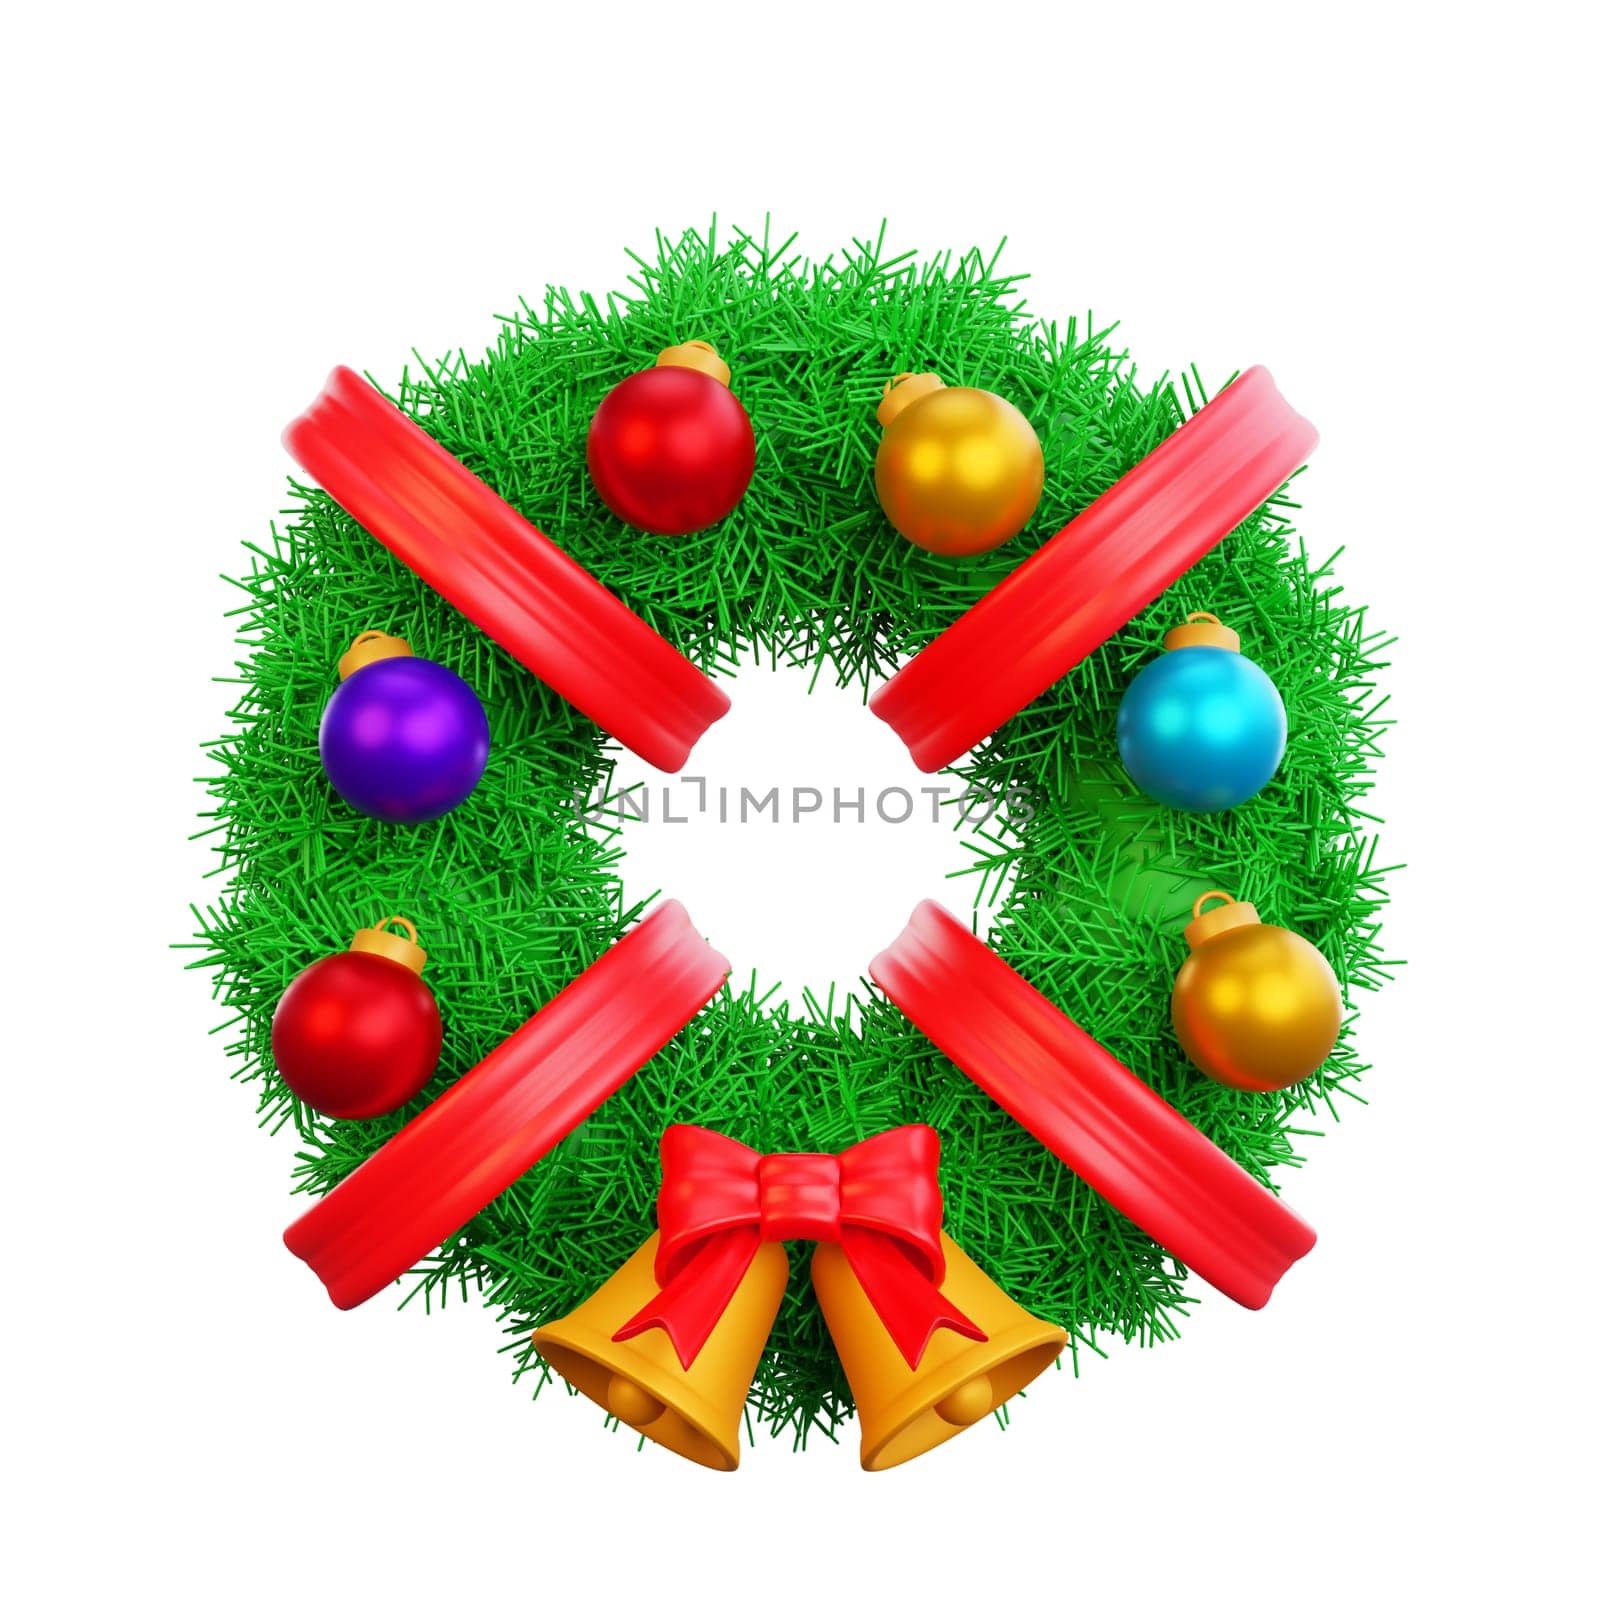 3D illustration of a Christmas wreath icon. Perfect for Christmas and happy new year celebrations